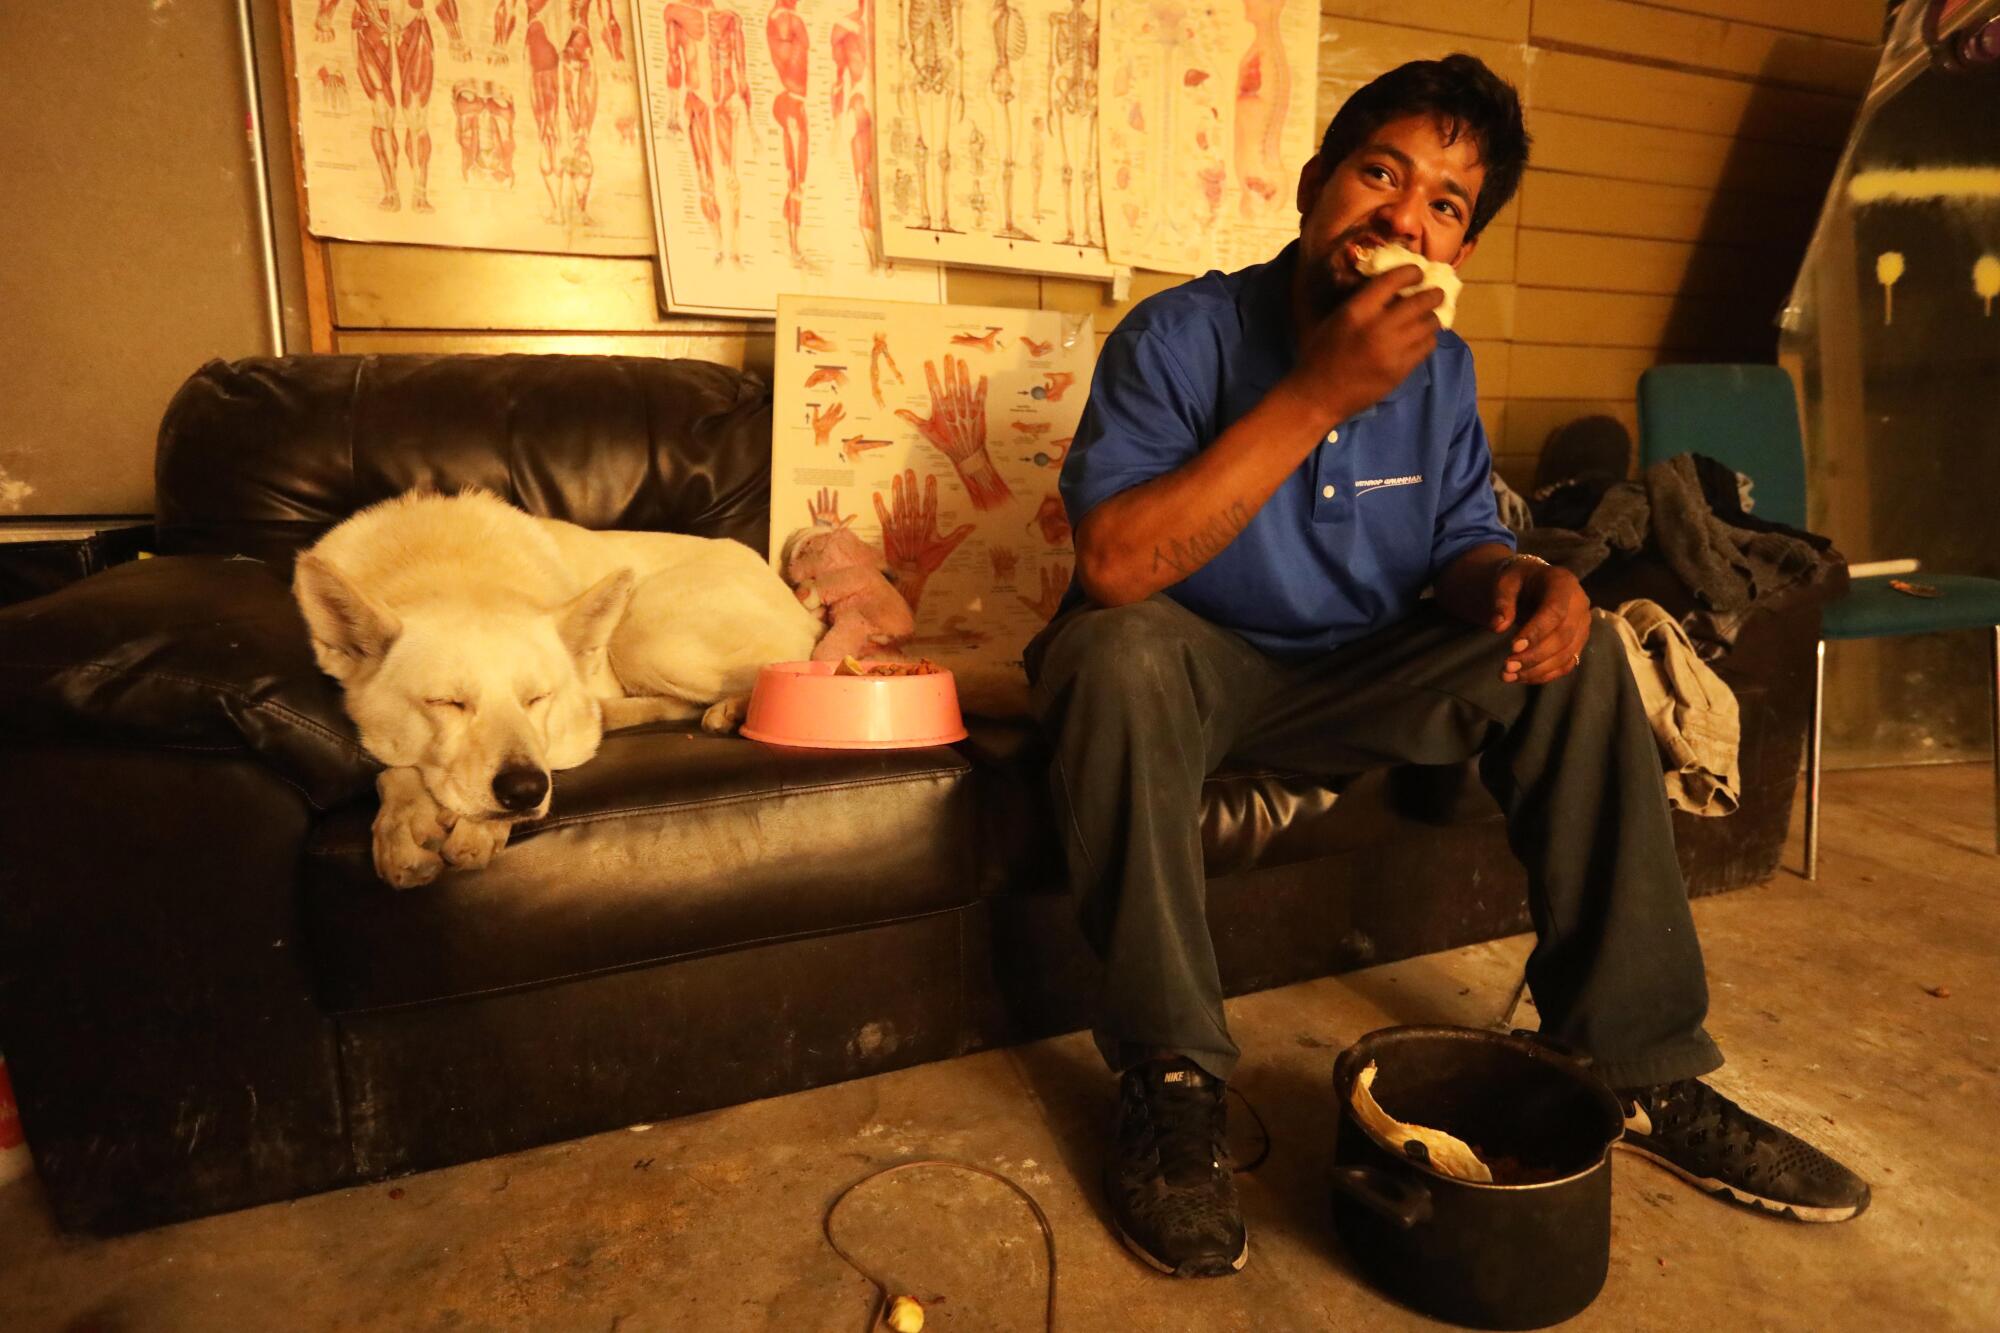 A man eats while sitting on a couch next to his dog and a dog food bowl